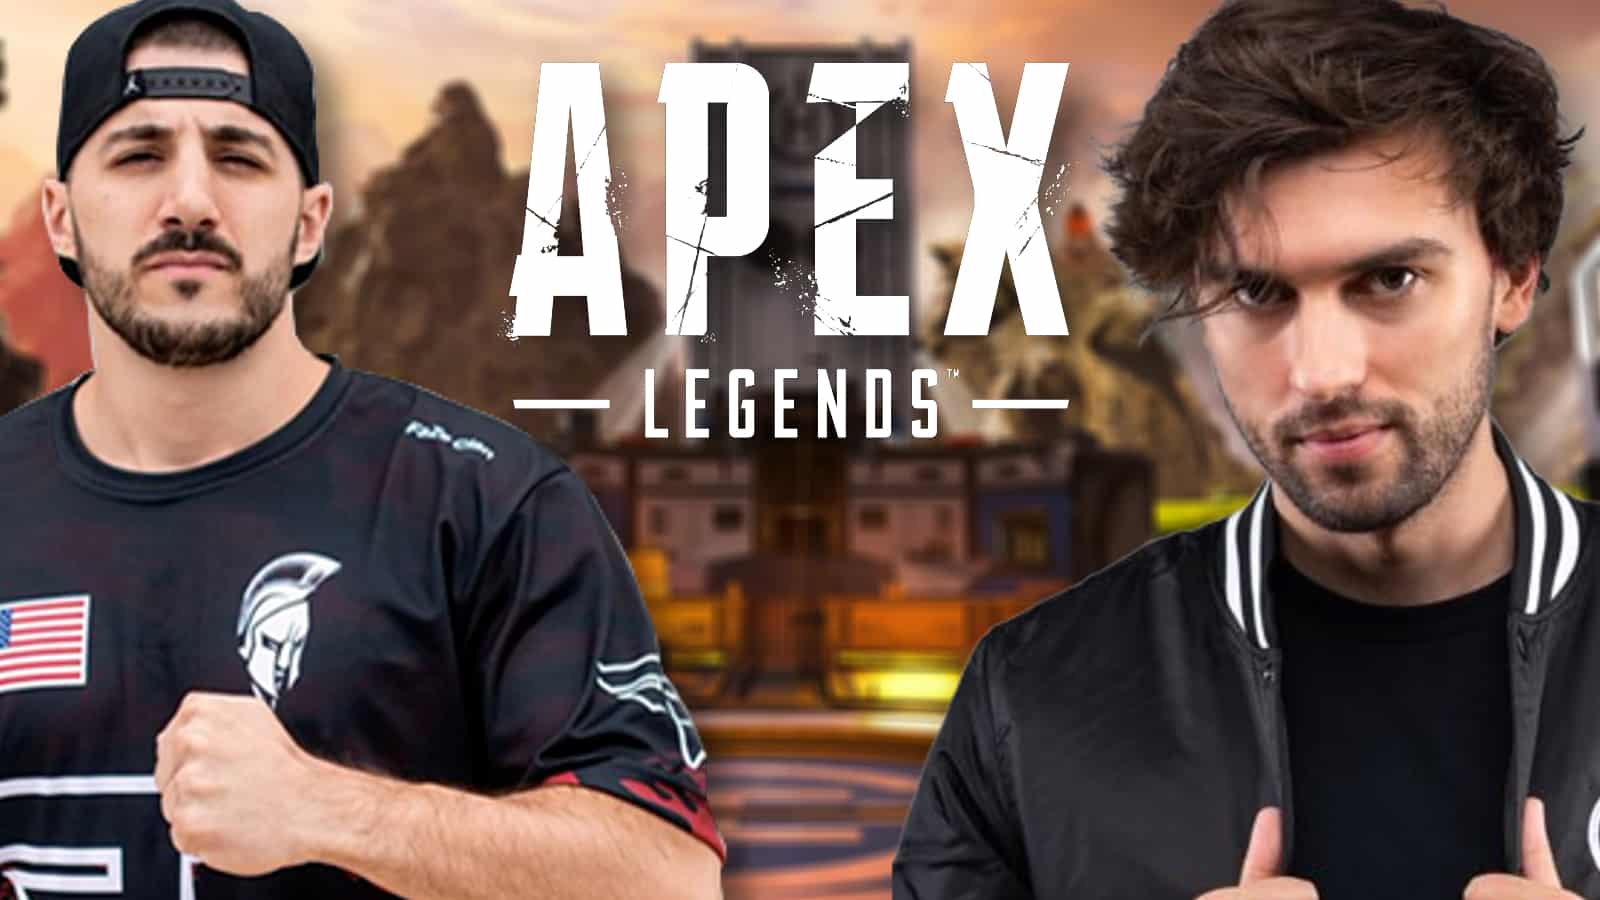 Nickmercs and Snipe3down teaming up in Apex Legends